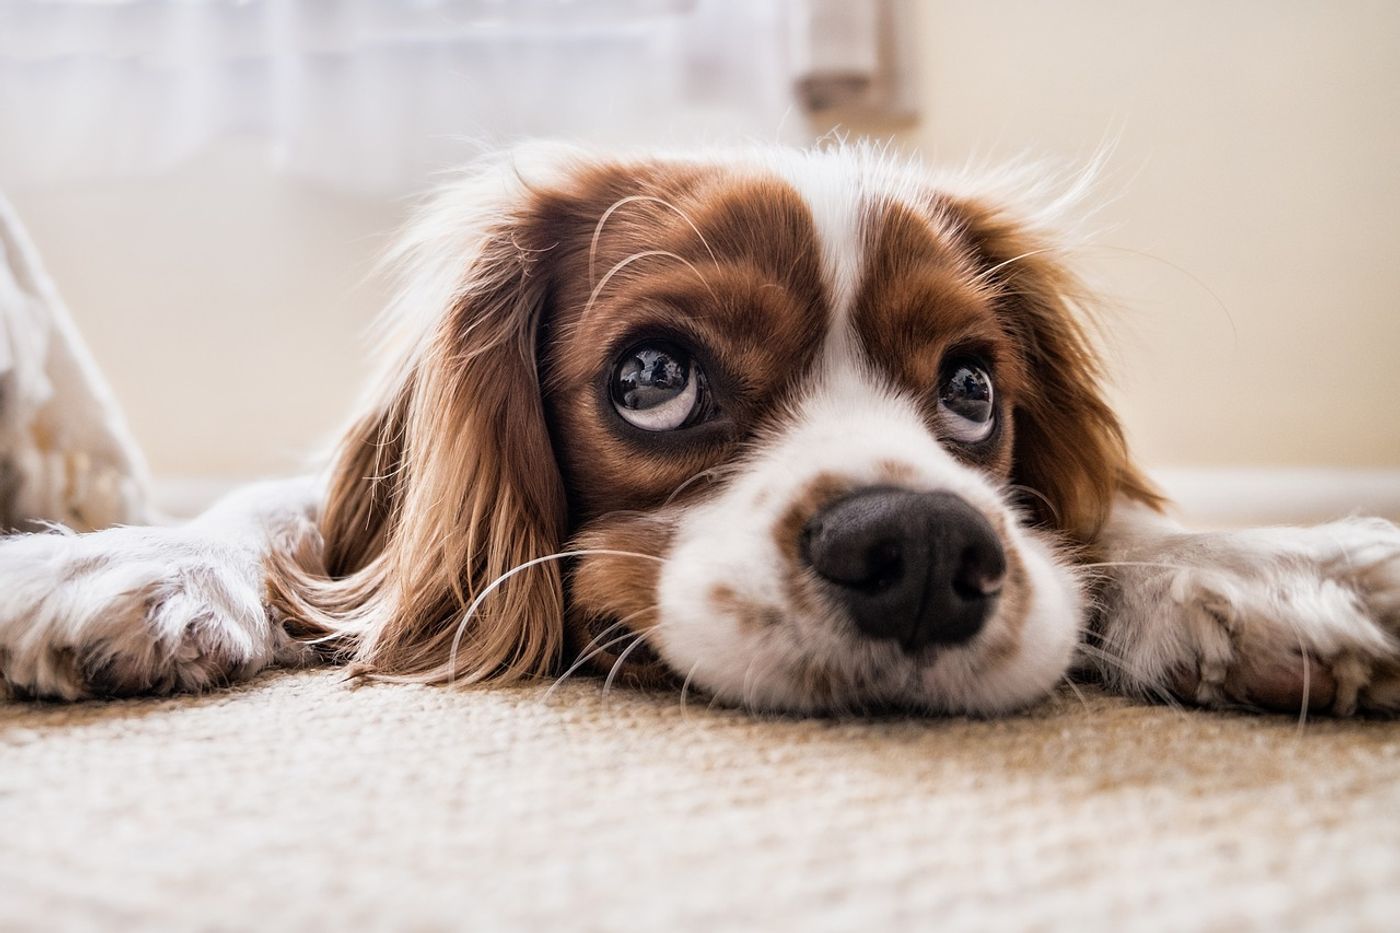 Is this dog giving its owner the puppy eyes on purpose? A new study suggests these faces can be directly linked to human attention.